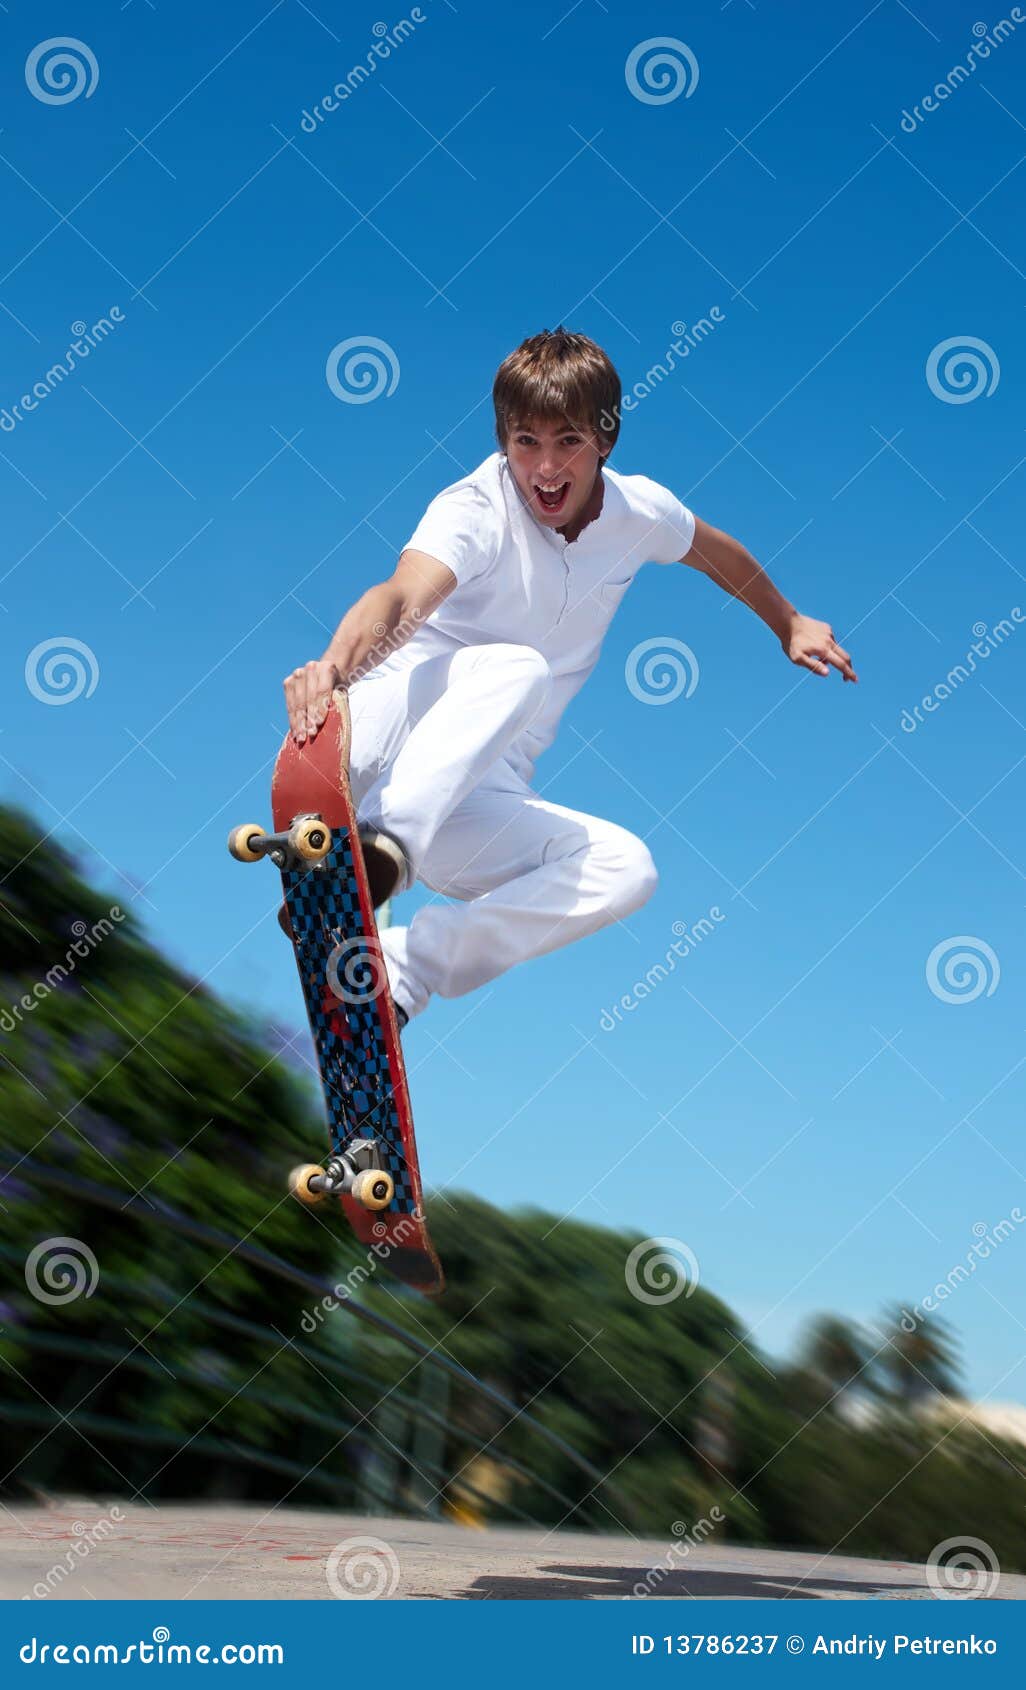 High jump stock image. Image of flip, safety, active - 13786237